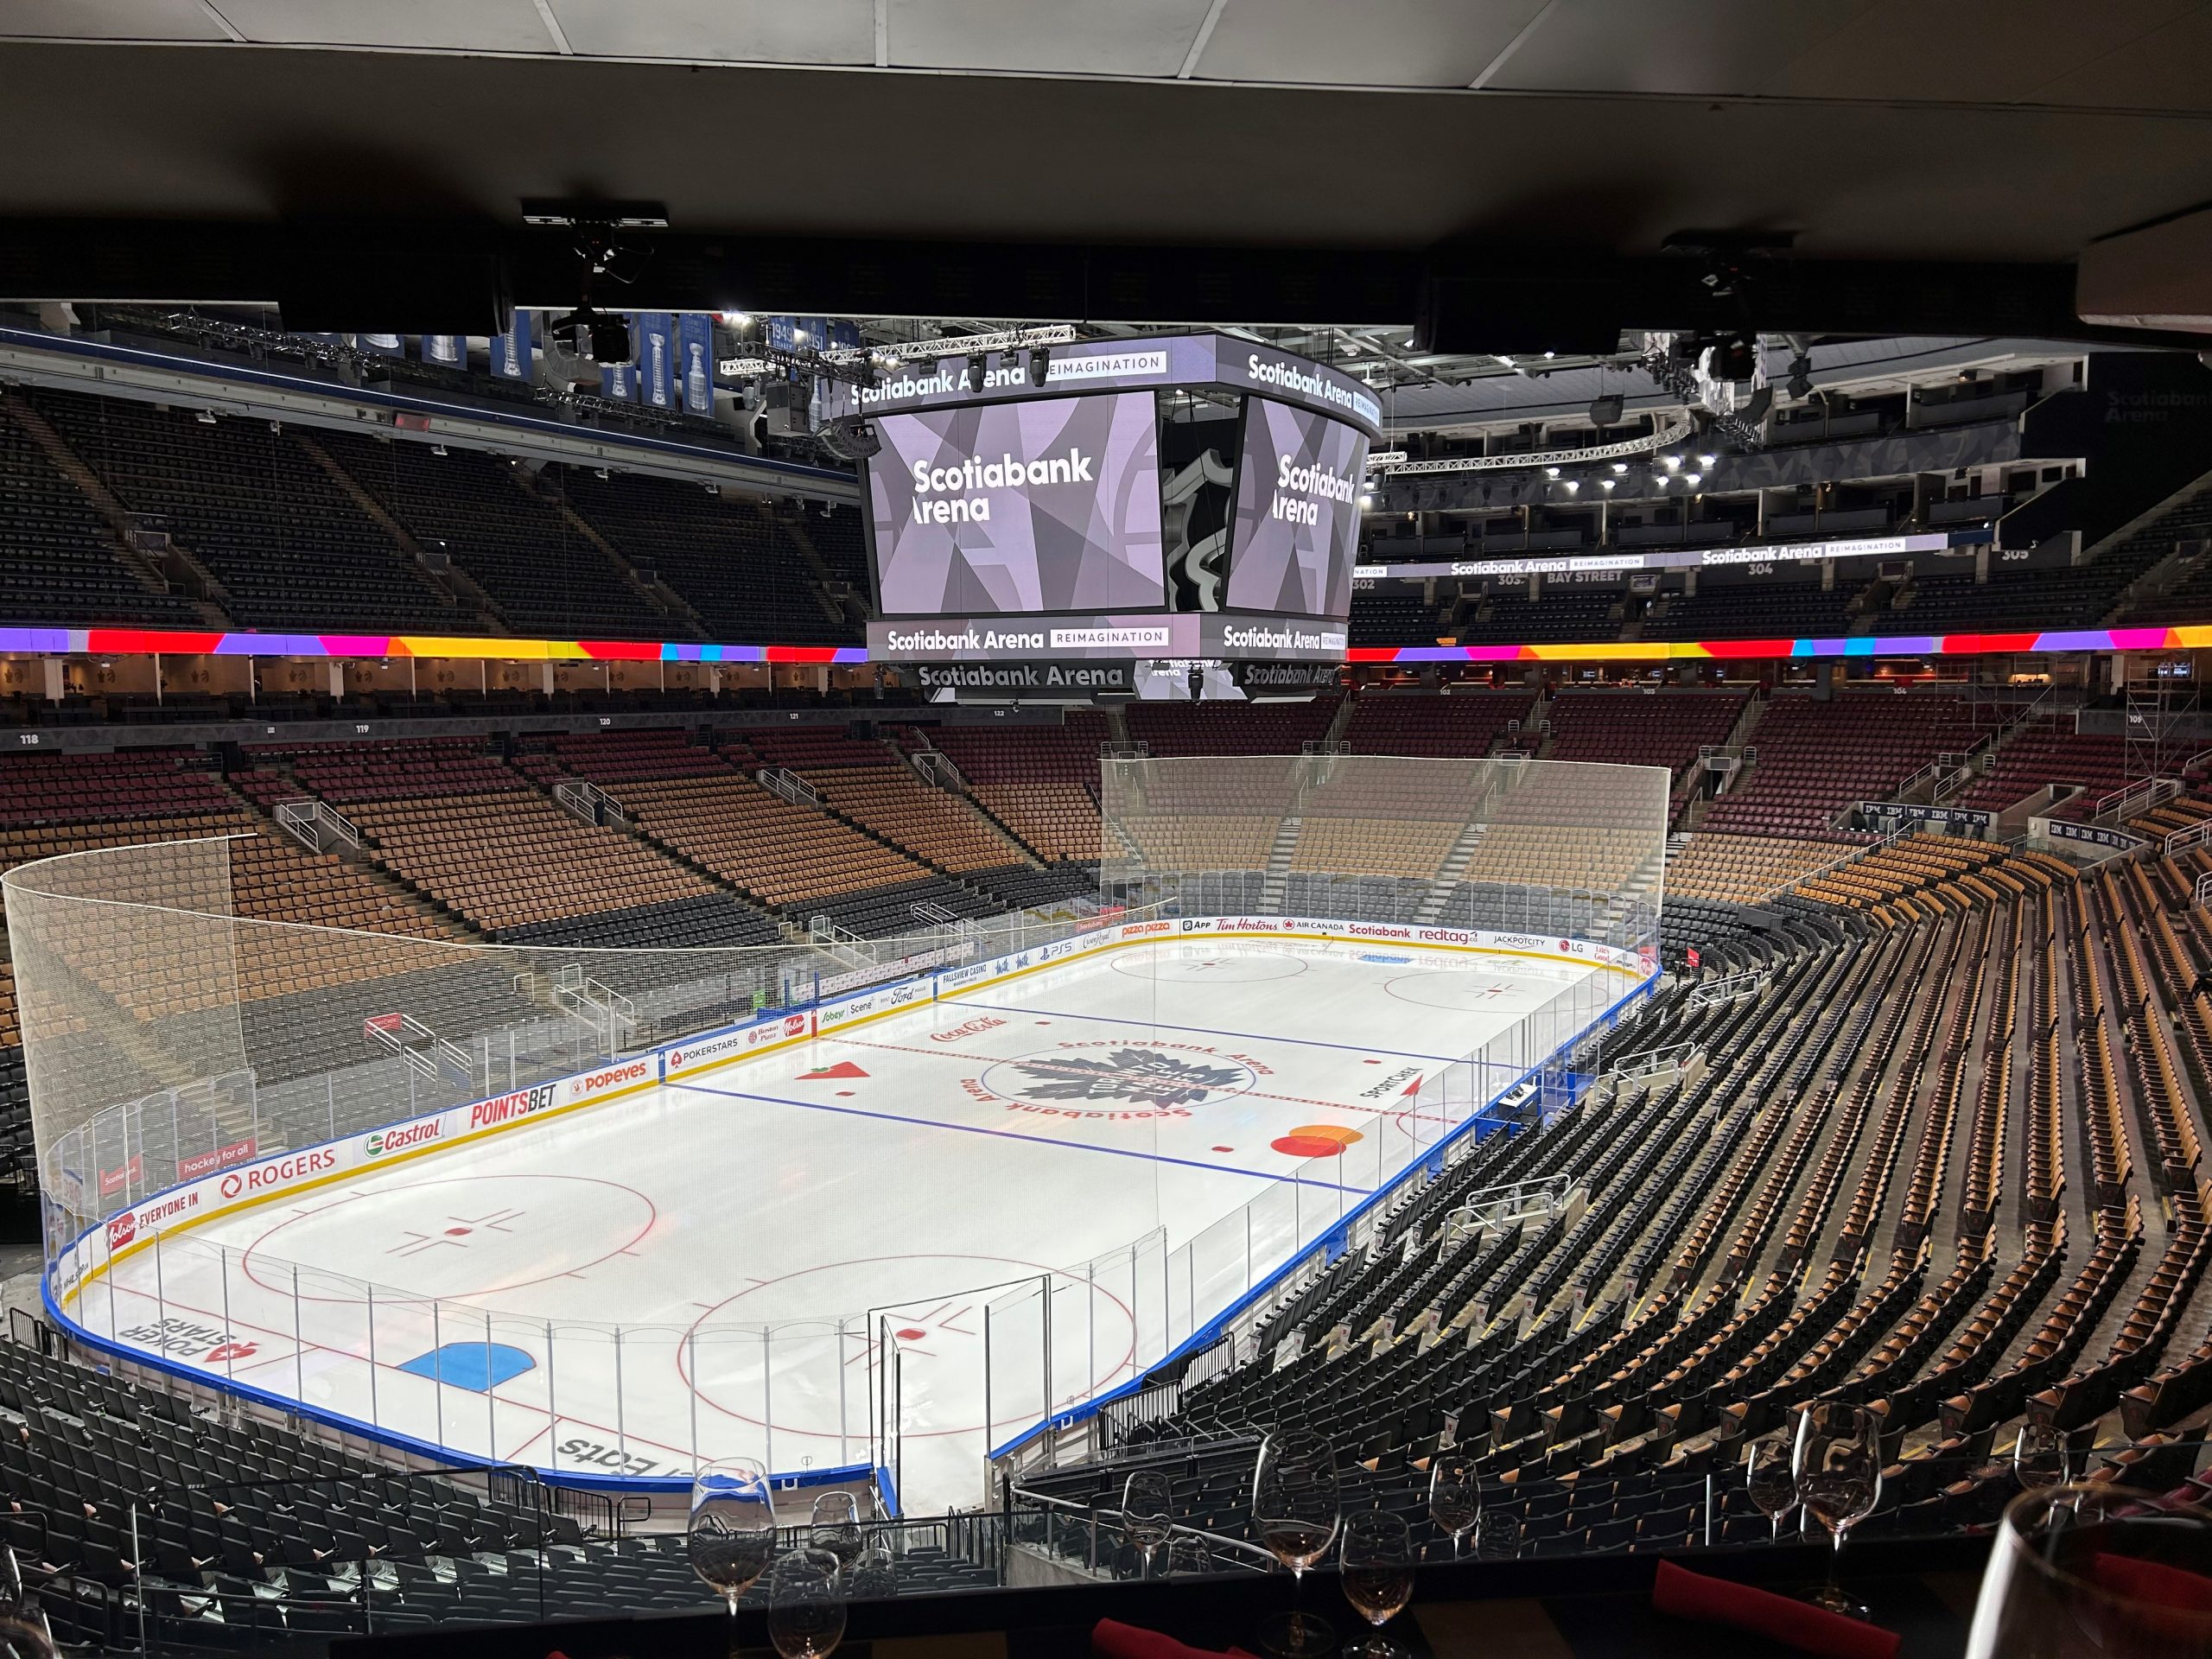 The arena, which is home to the Toronto Maple Leafs, the Toronto Raptors and a variety of live events, will be celebrating its 25th anniversary in February.